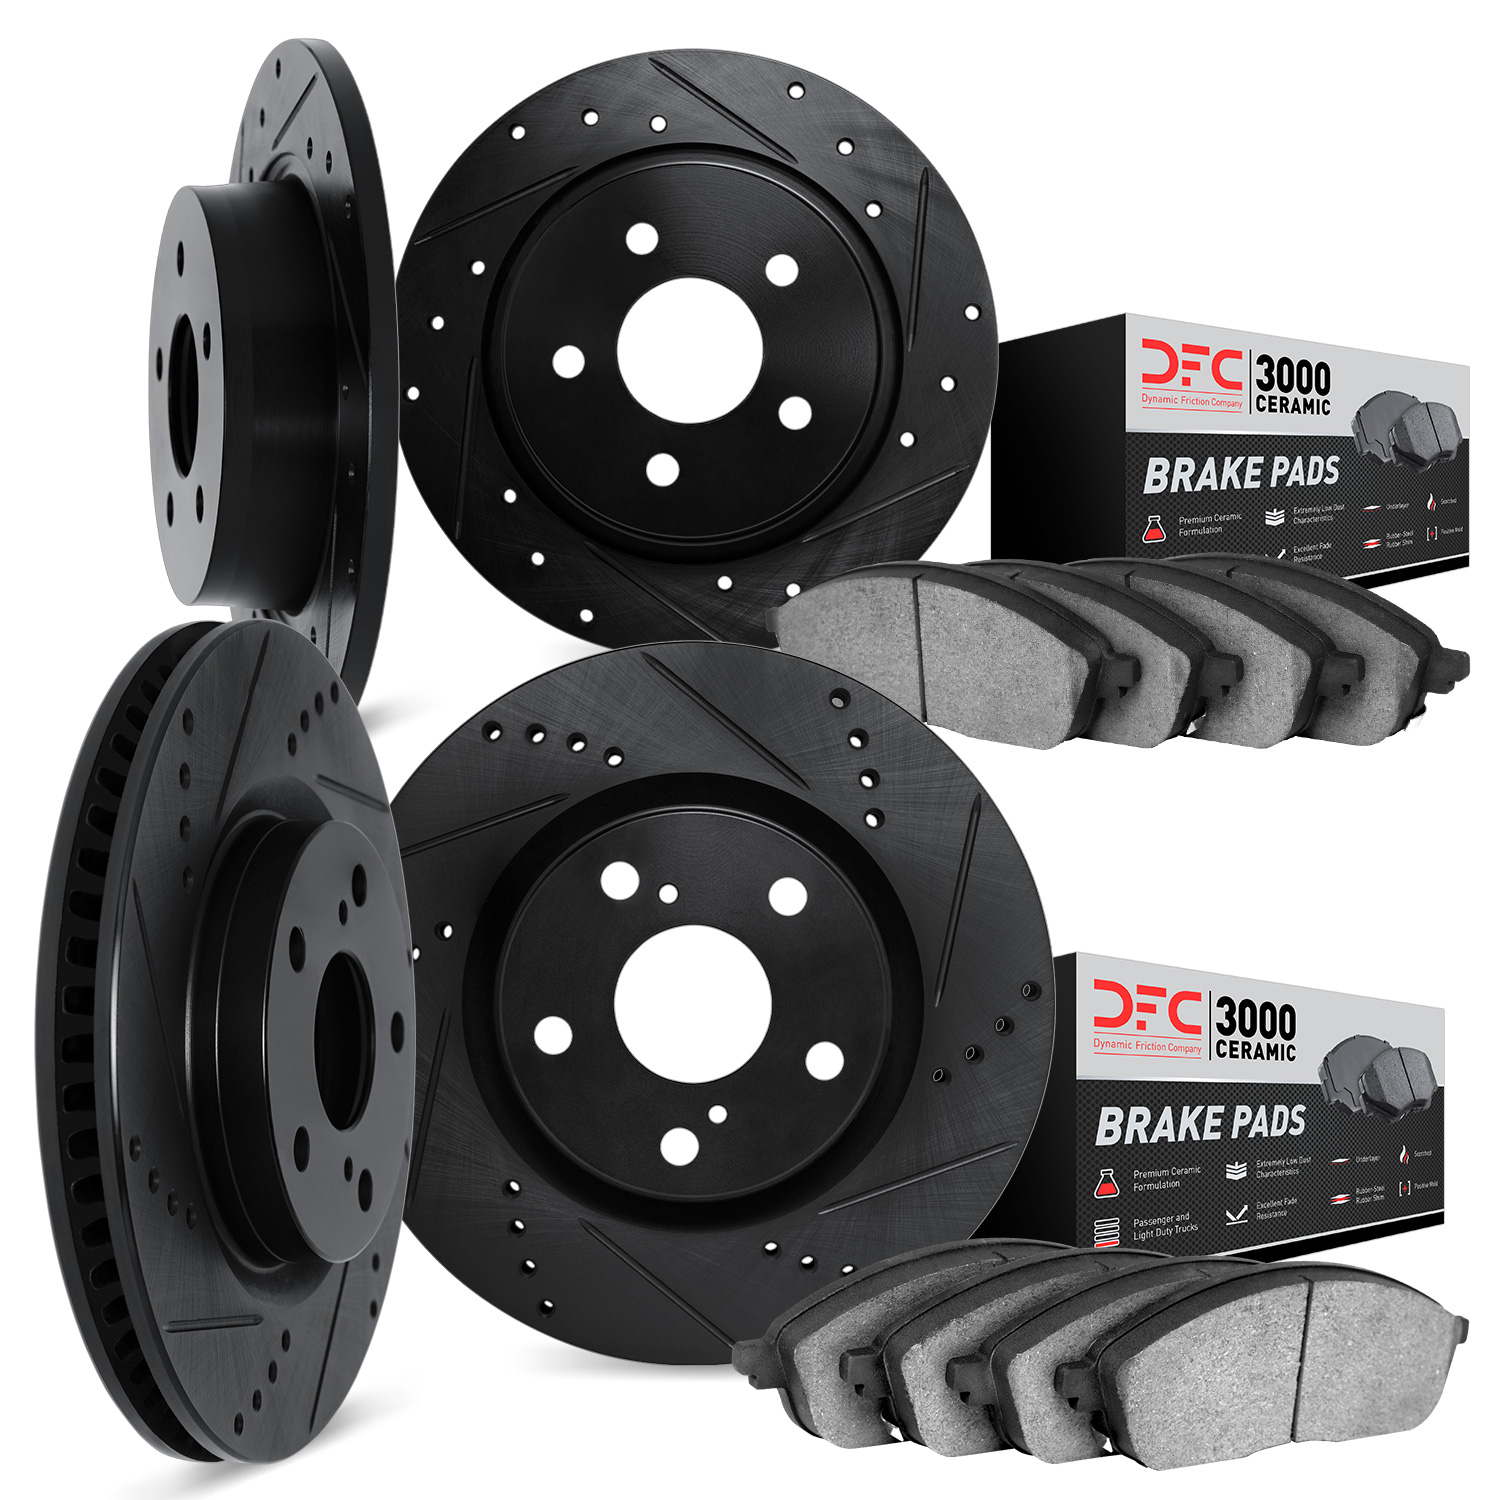 8304-31026 Drilled/Slotted Brake Rotors with 3000-Series Ceramic Brake Pads Kit [Black], 1998-1999 BMW, Position: Front and Rear